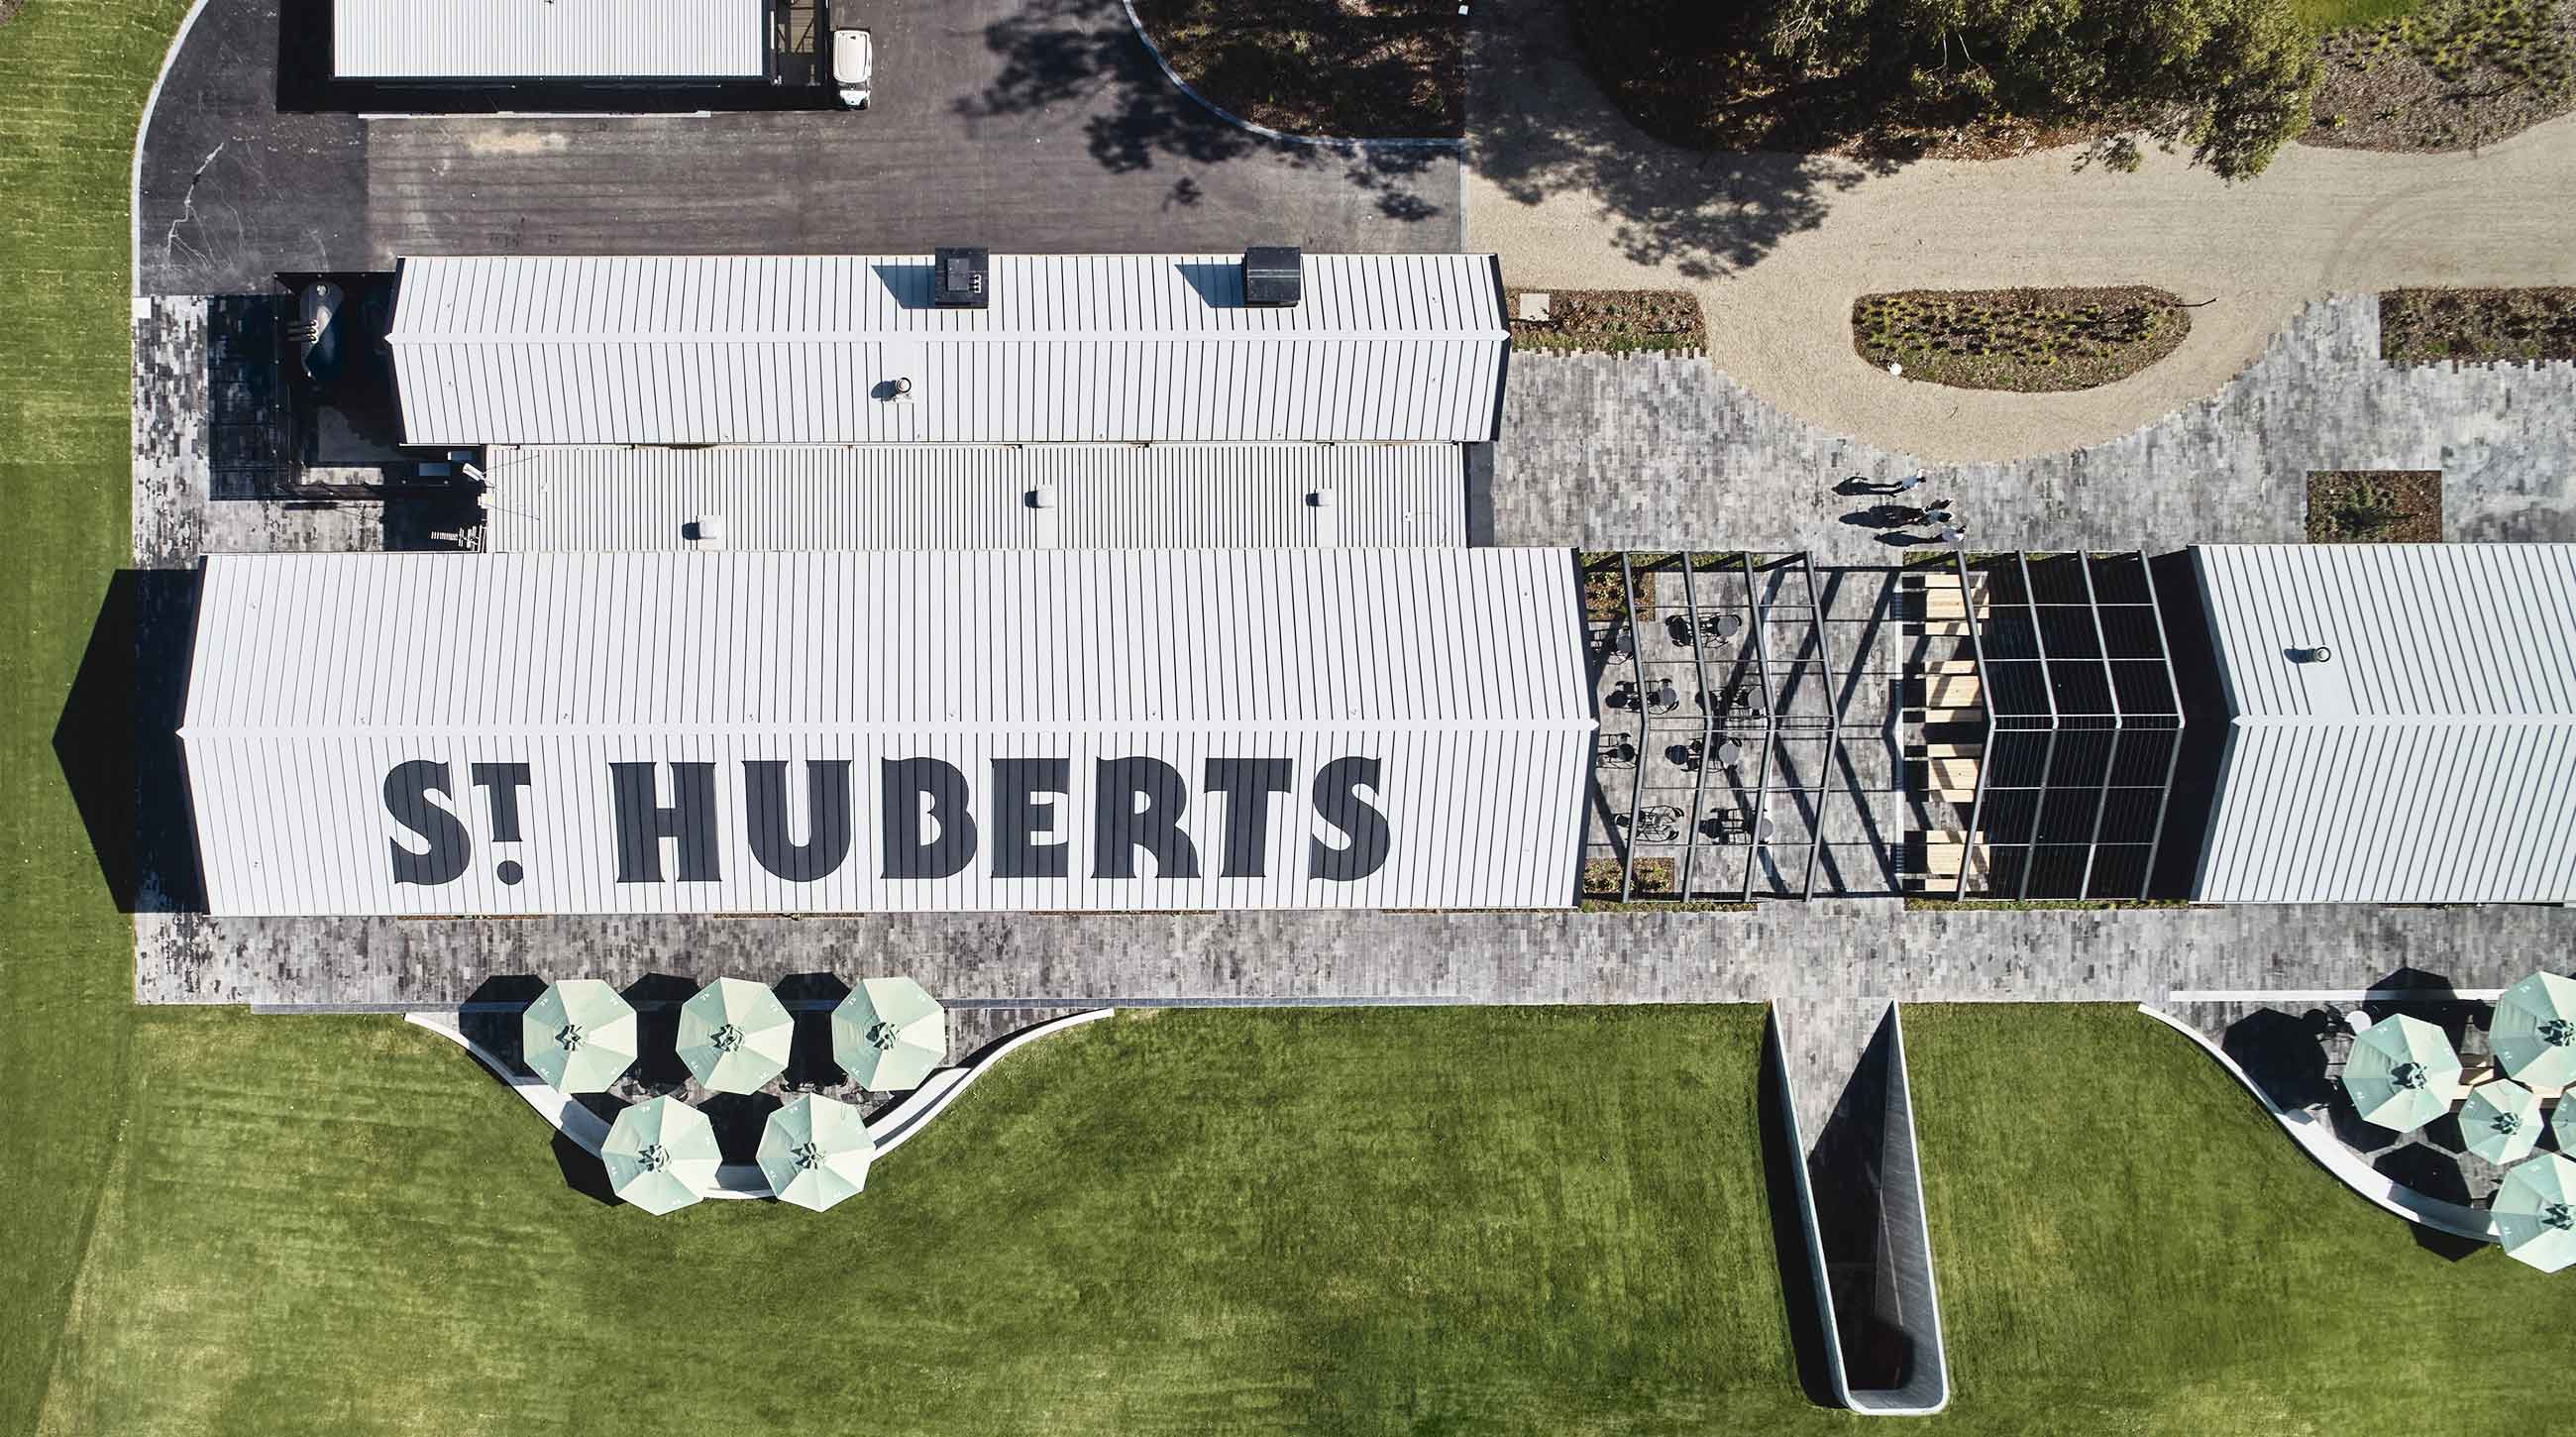 St Huberts logo on the roof of their building.